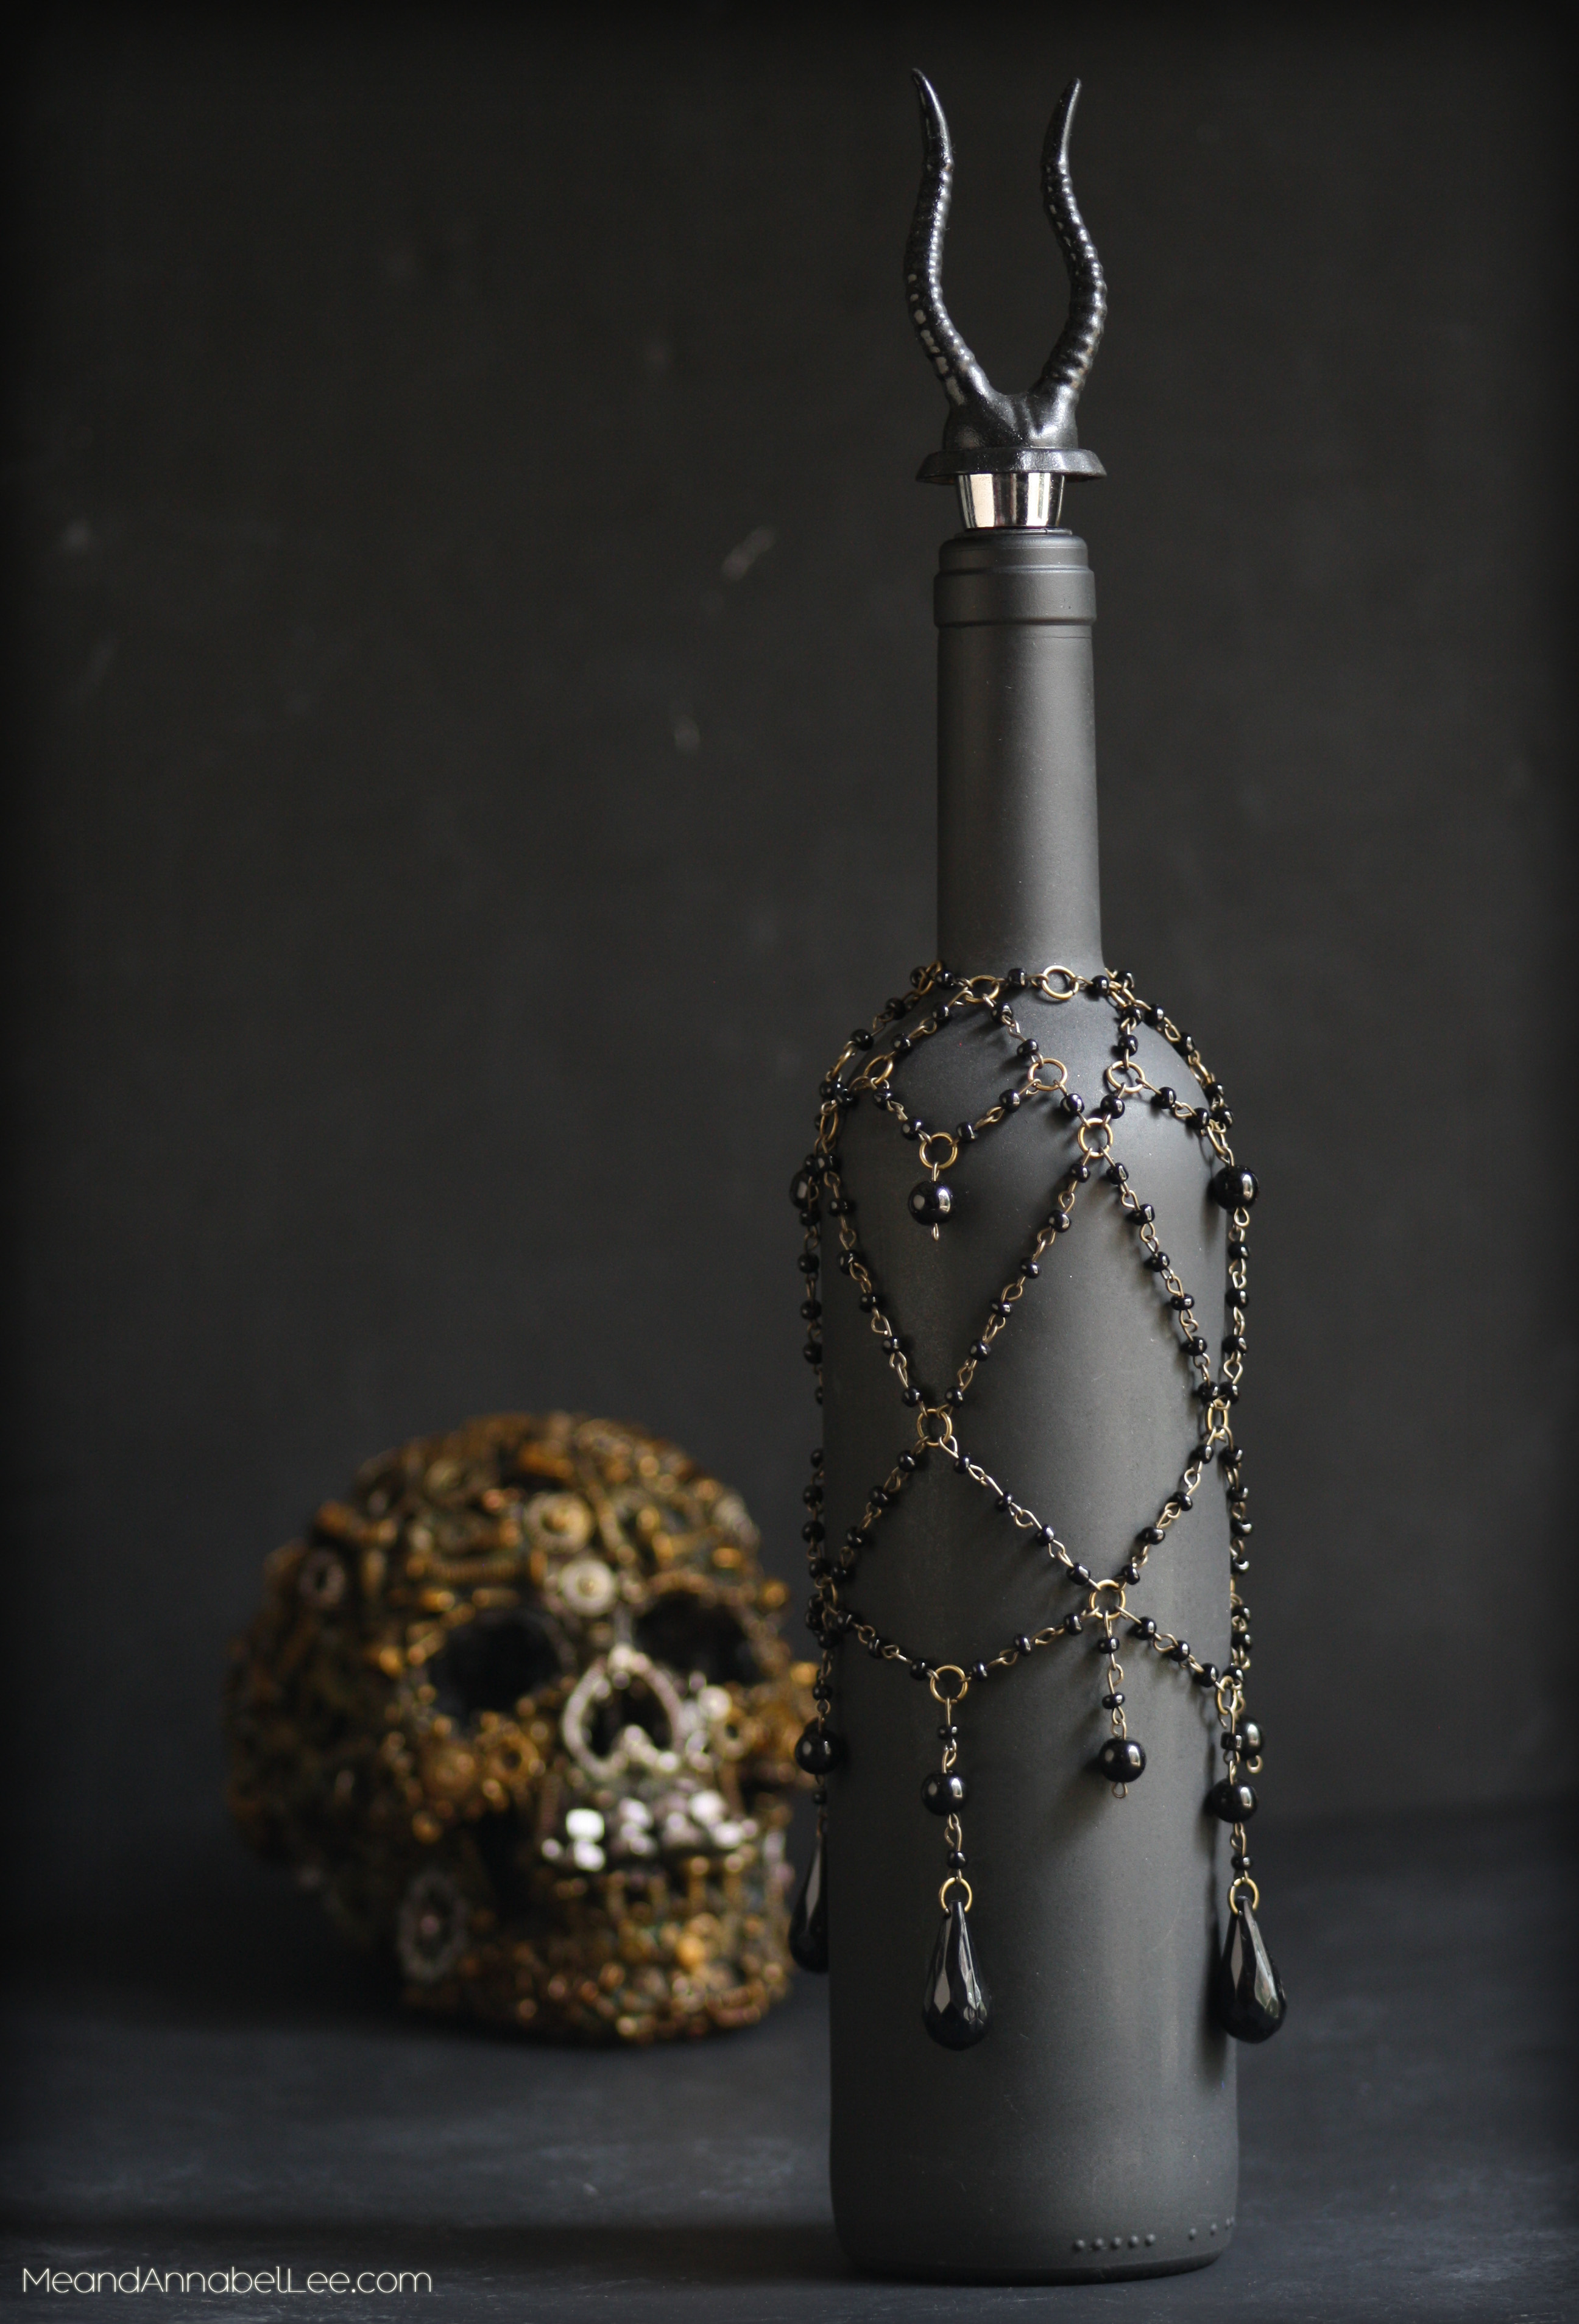 Gothic Glam Beaded Wine Bottle Cover - Goth It yourself - Black & Gold Entertaining - www.MeandAnnabelLee.com - Blog for all things Dark, Gothic, Victorian, & Unusual